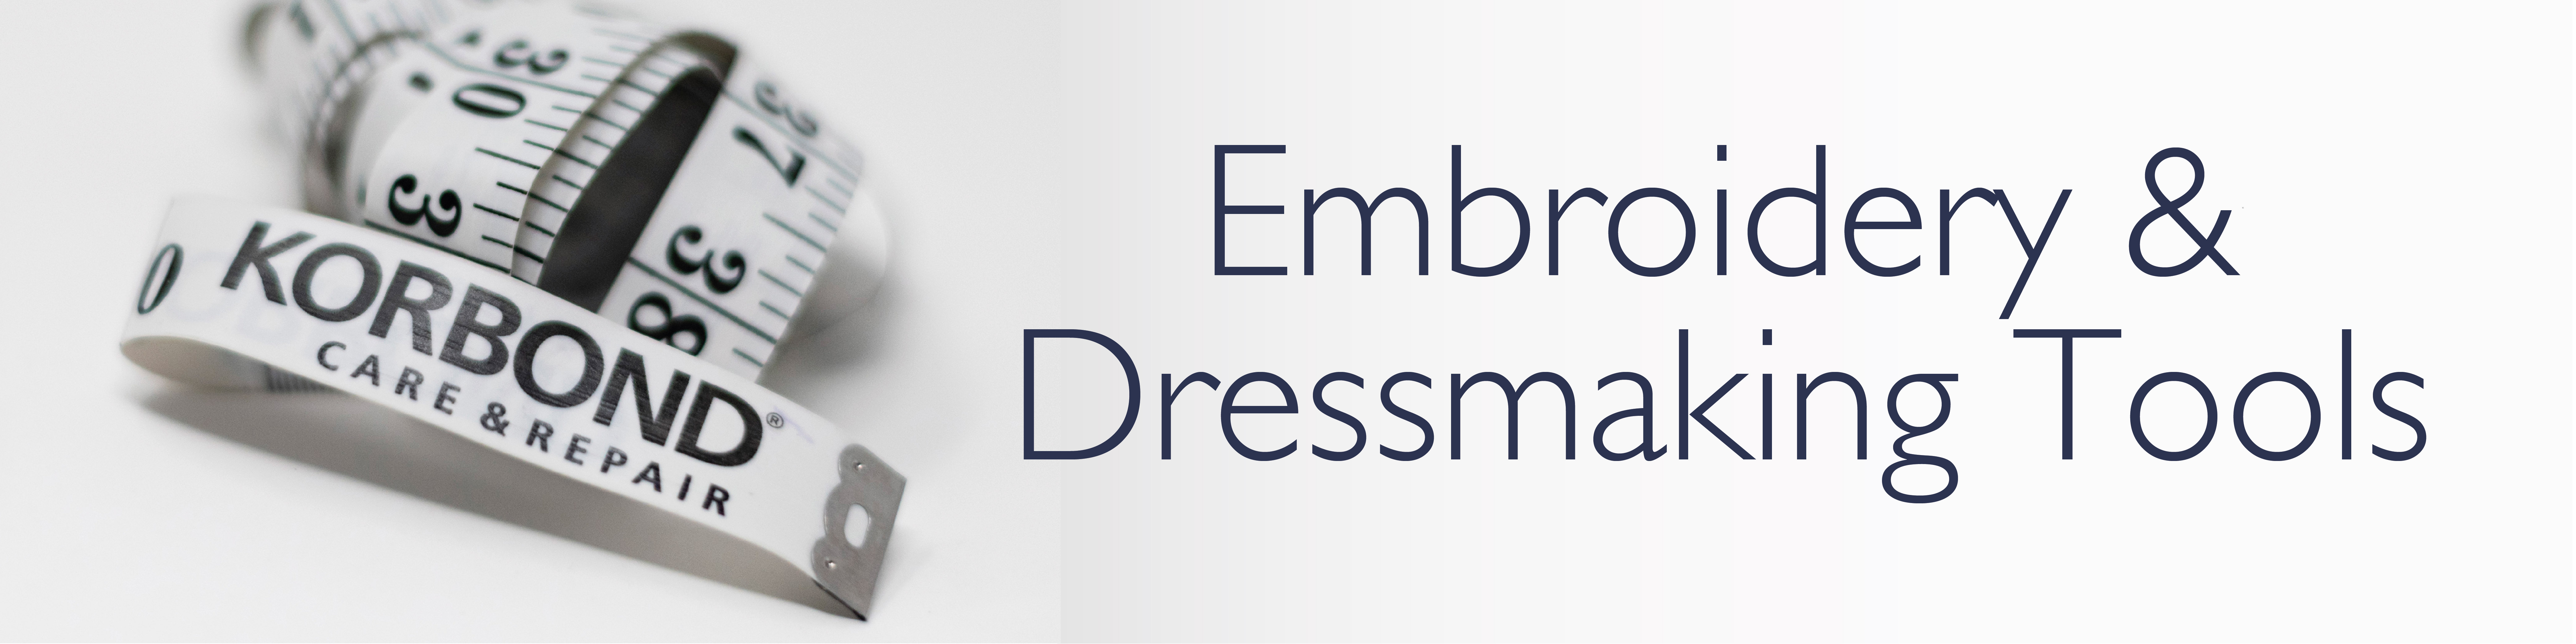 Embroidery & Dressmaking Tools